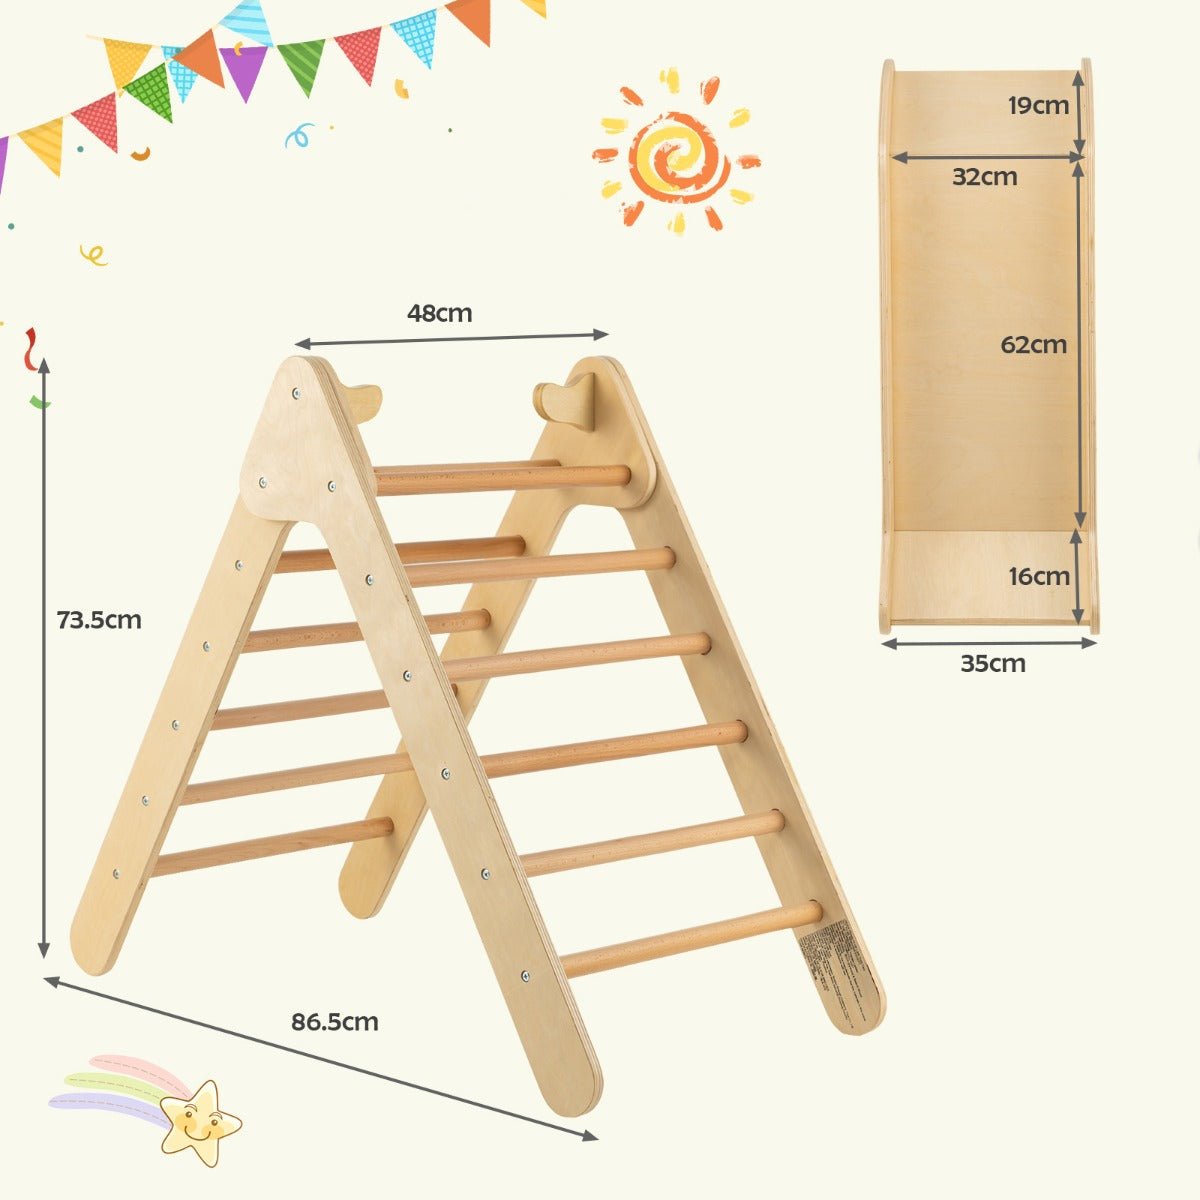 Quality Wooden Climbing Triangle Set - Shop Today